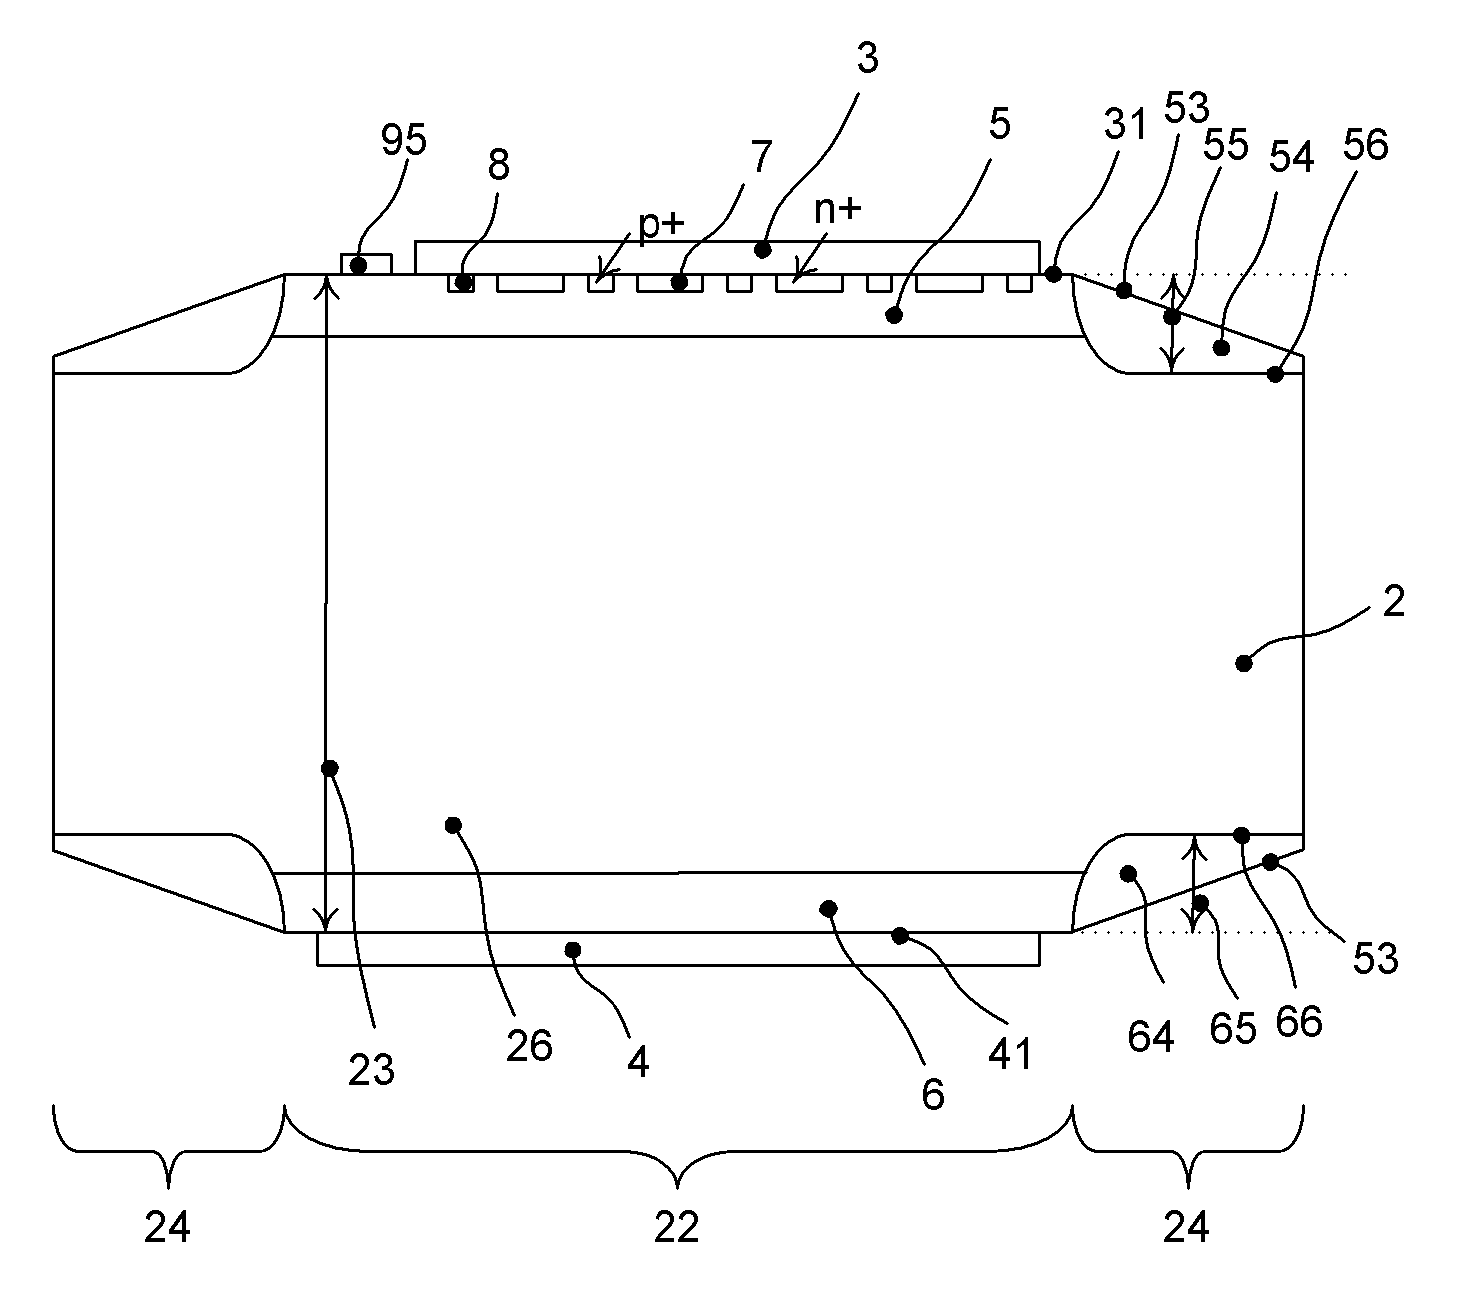 Bipolar non-punch-hrough power semiconductor device